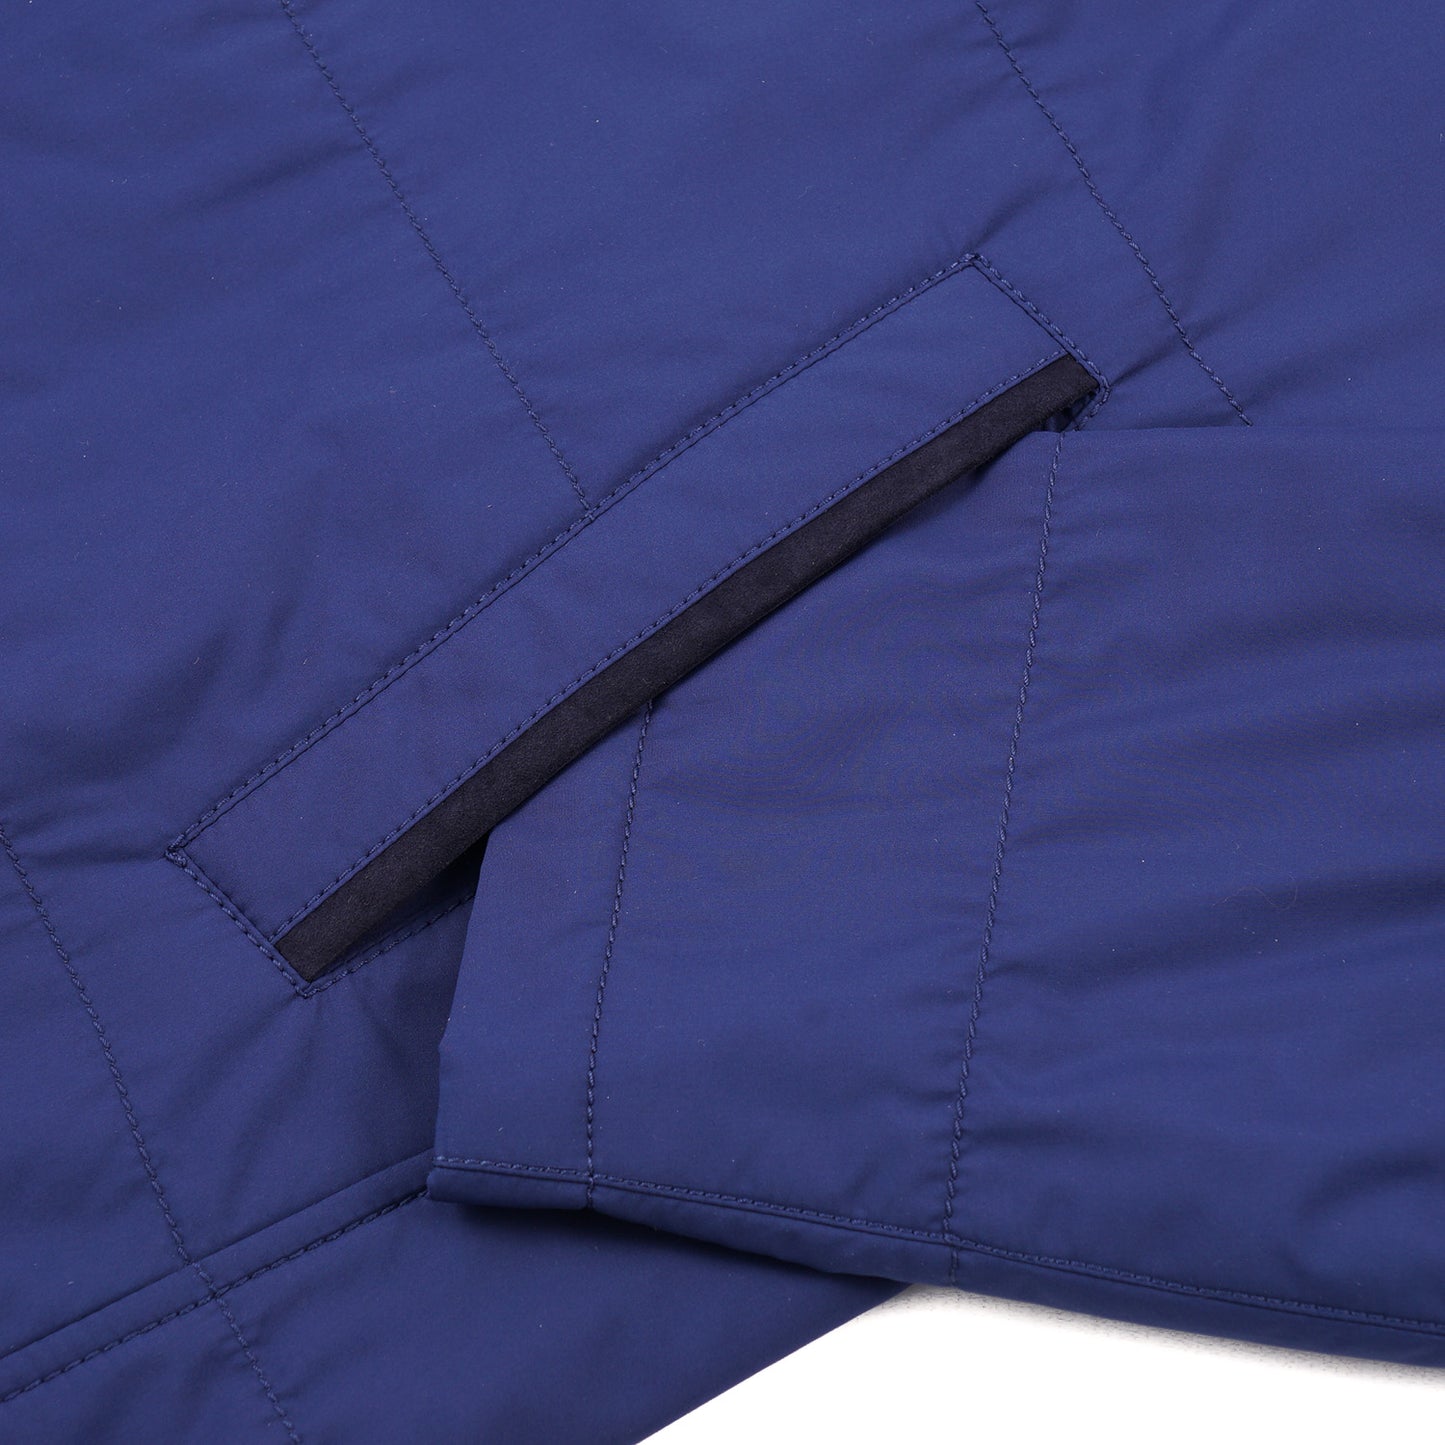 Kiton Quilted Packable Travel Jacket - Top Shelf Apparel